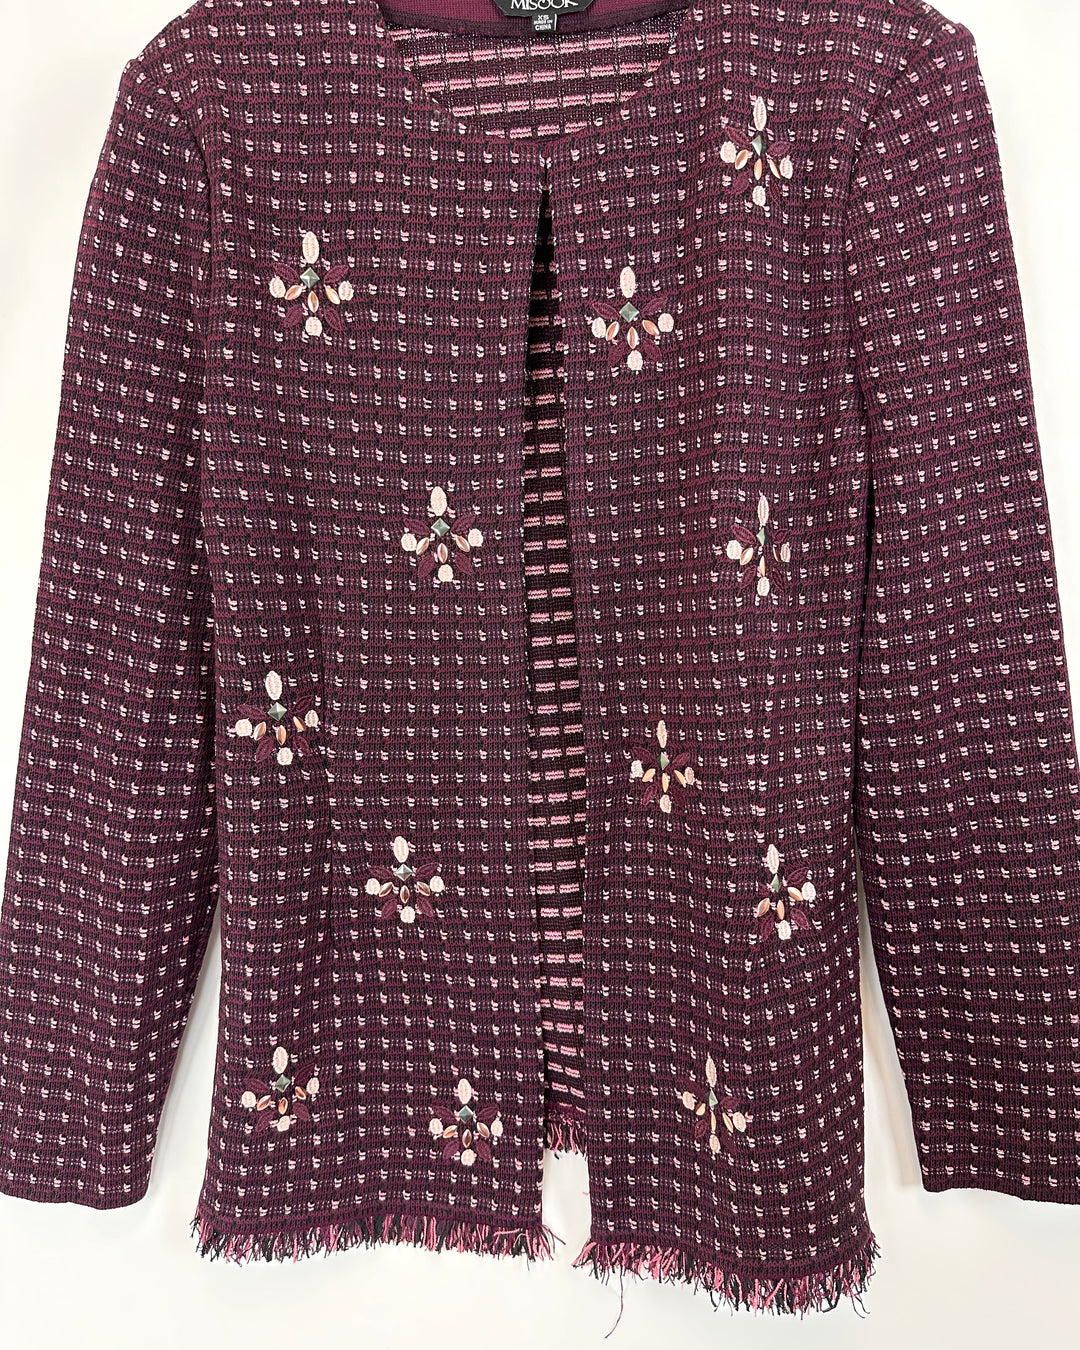 Deep Maroon And Pink Jacket - Size 0-2